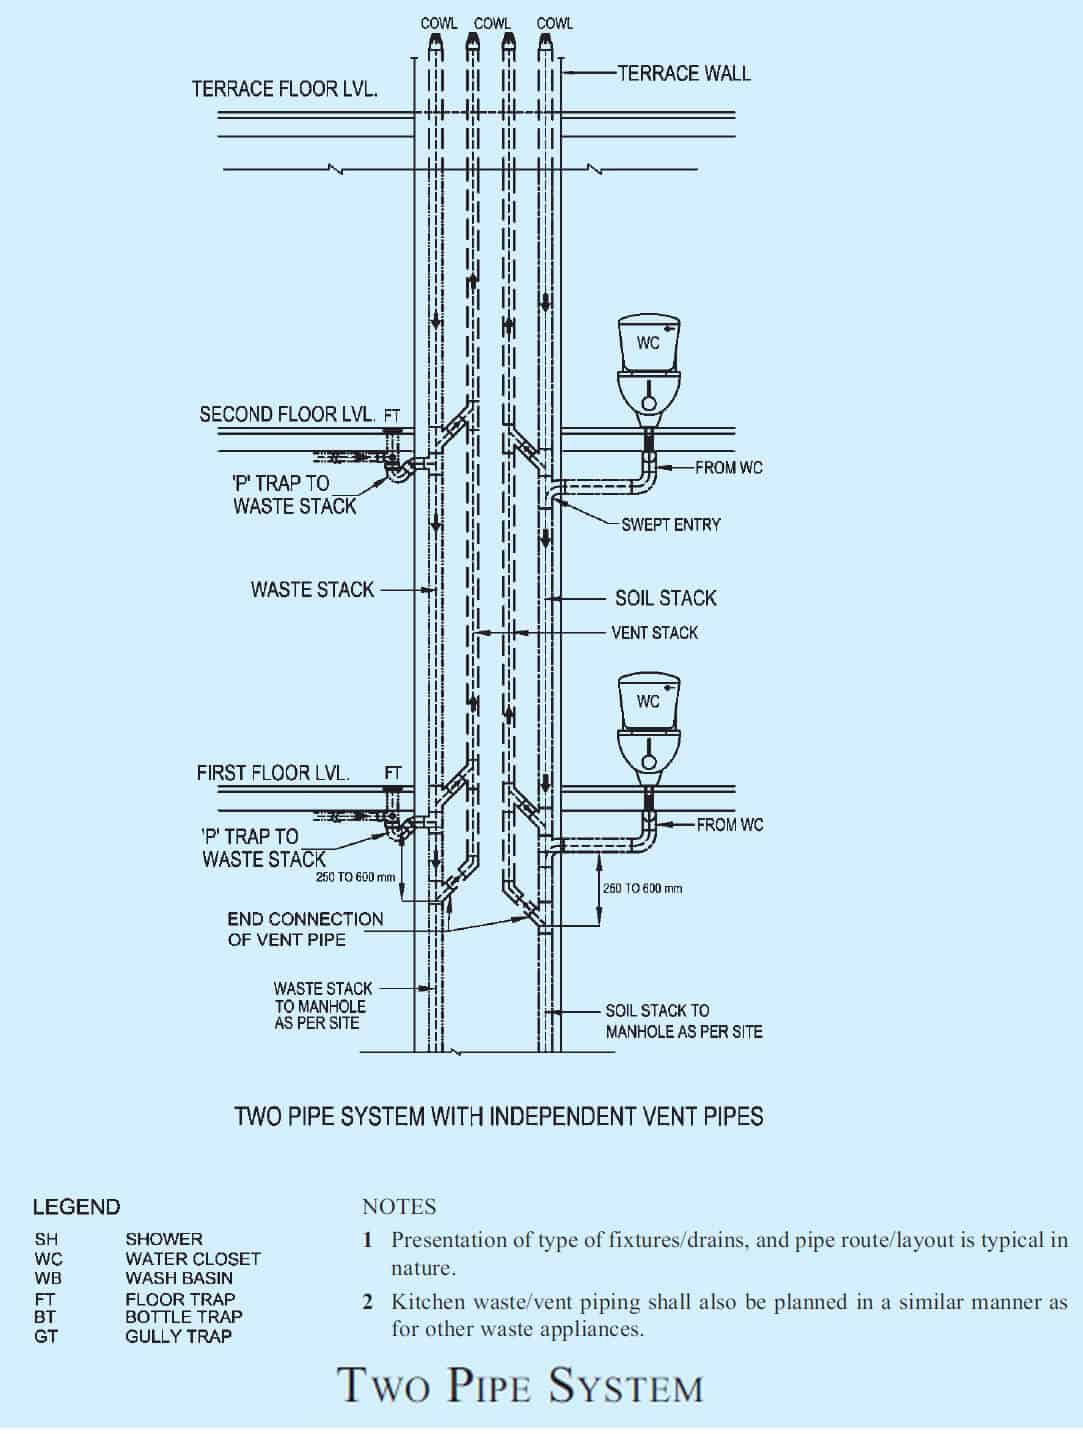 Pipe: A detailed technical guide for a sound plumbing system